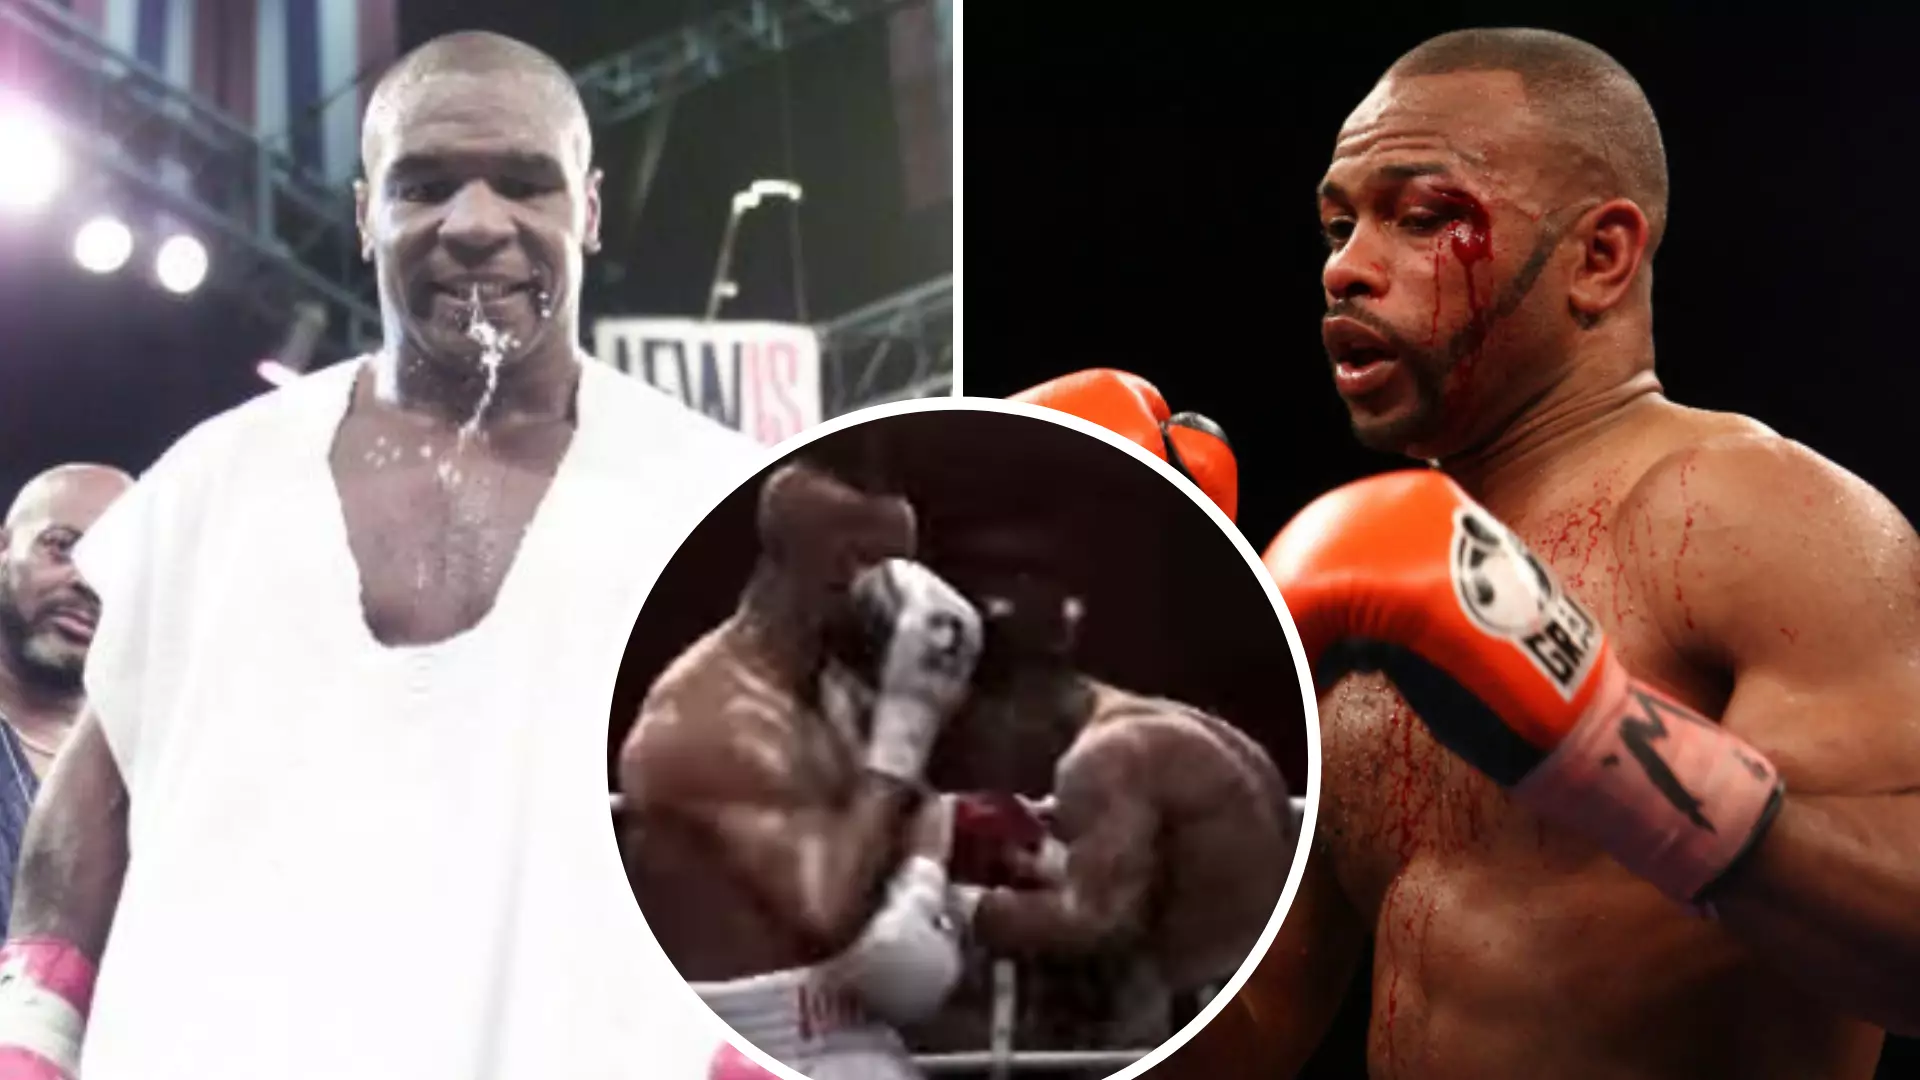 Mike Tyson Vs Roy Jones Jr Simulated On Fight Night Round 4, Ends In Brutal Knockout